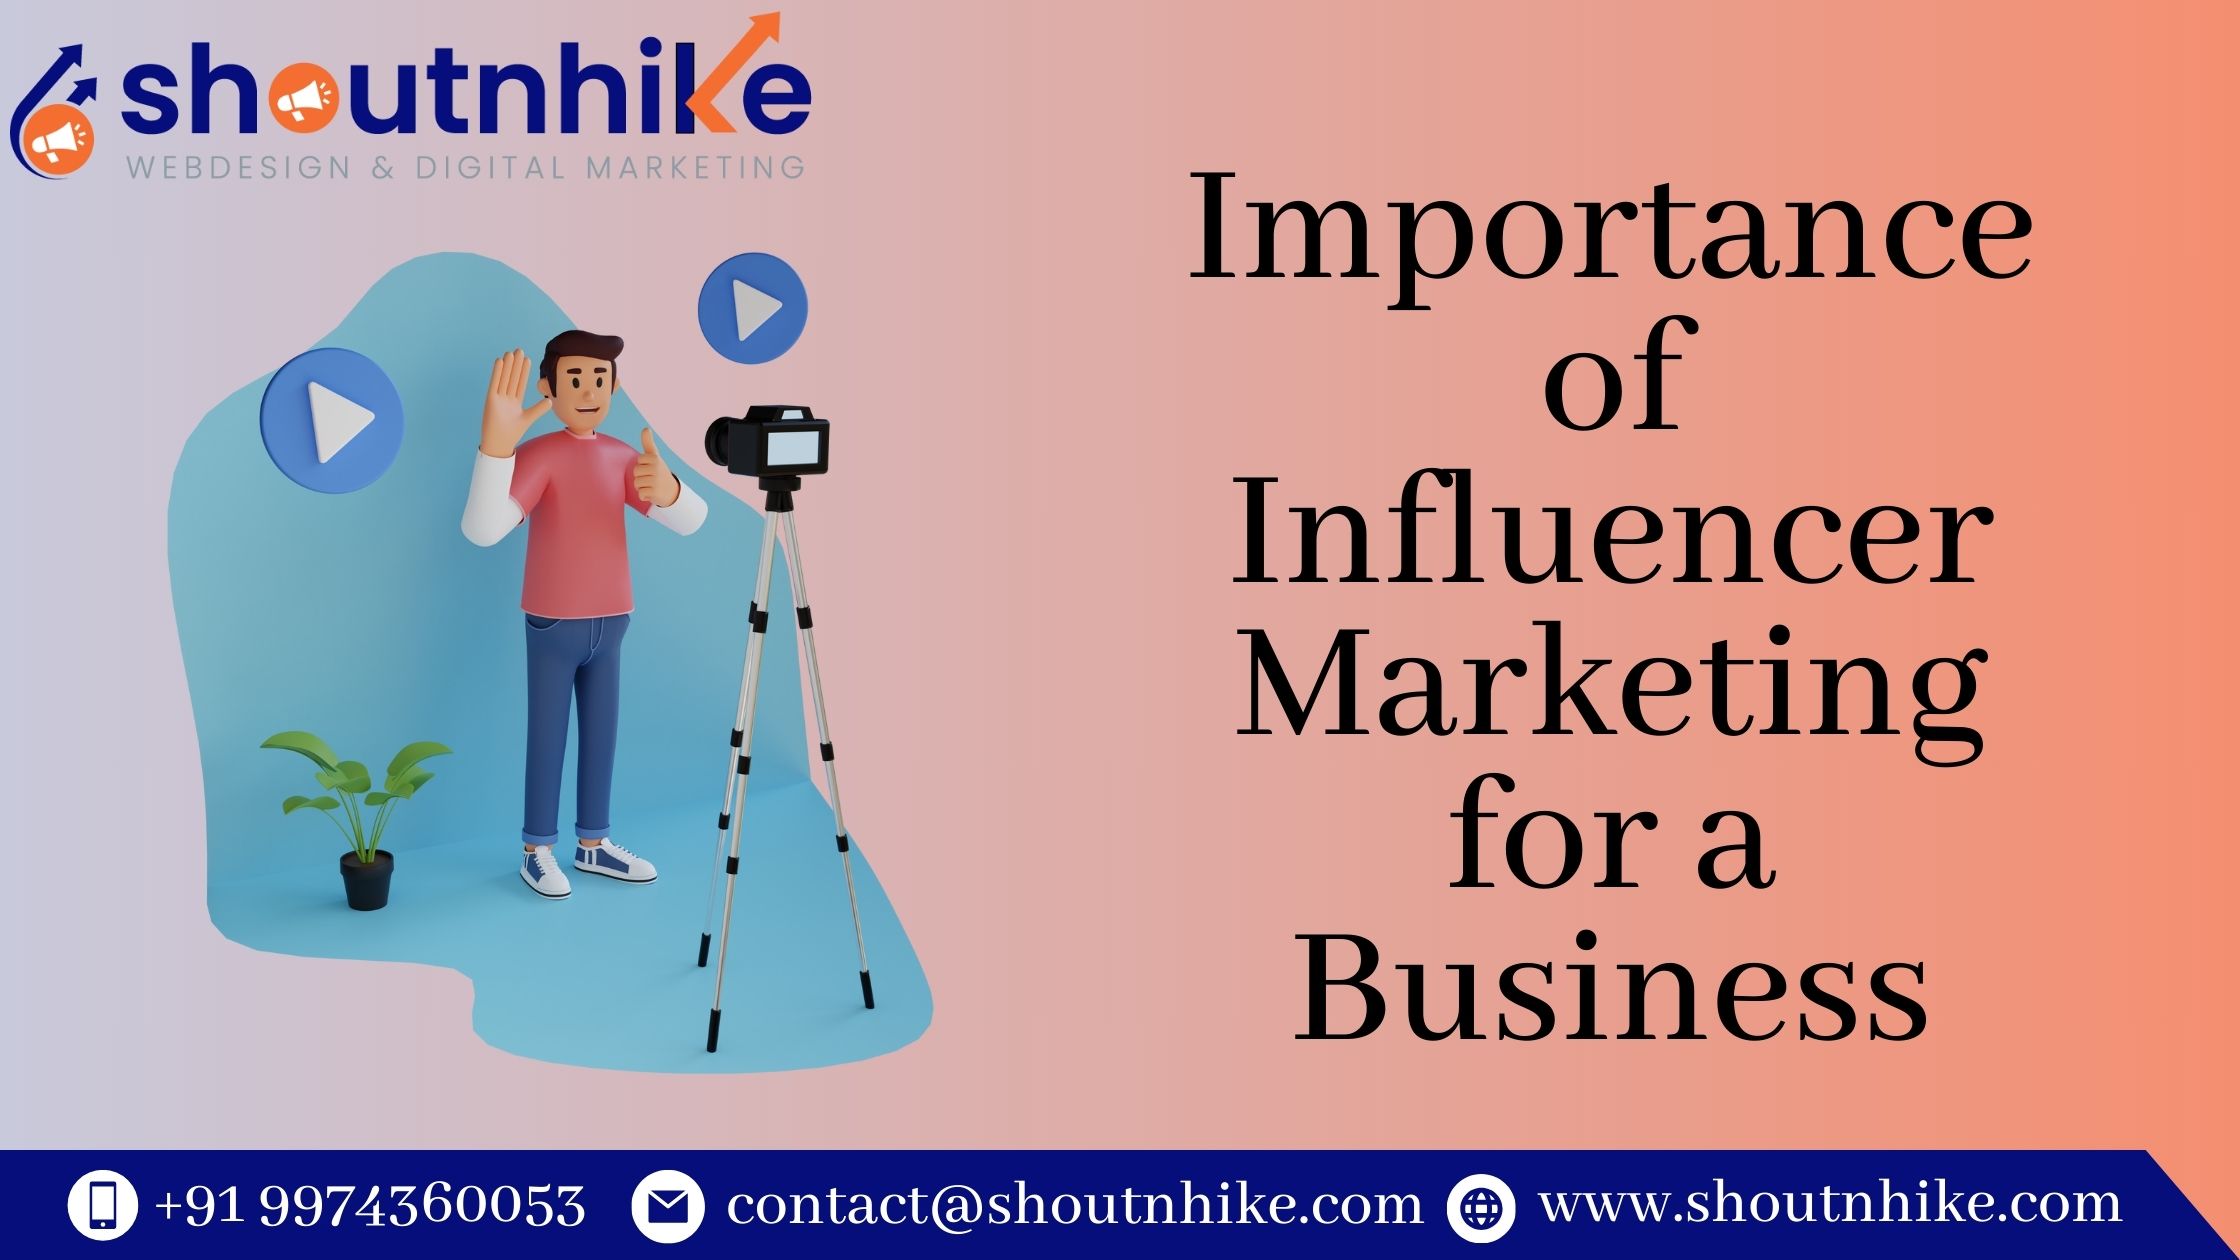 Importance of Influencer Marketing for a Business